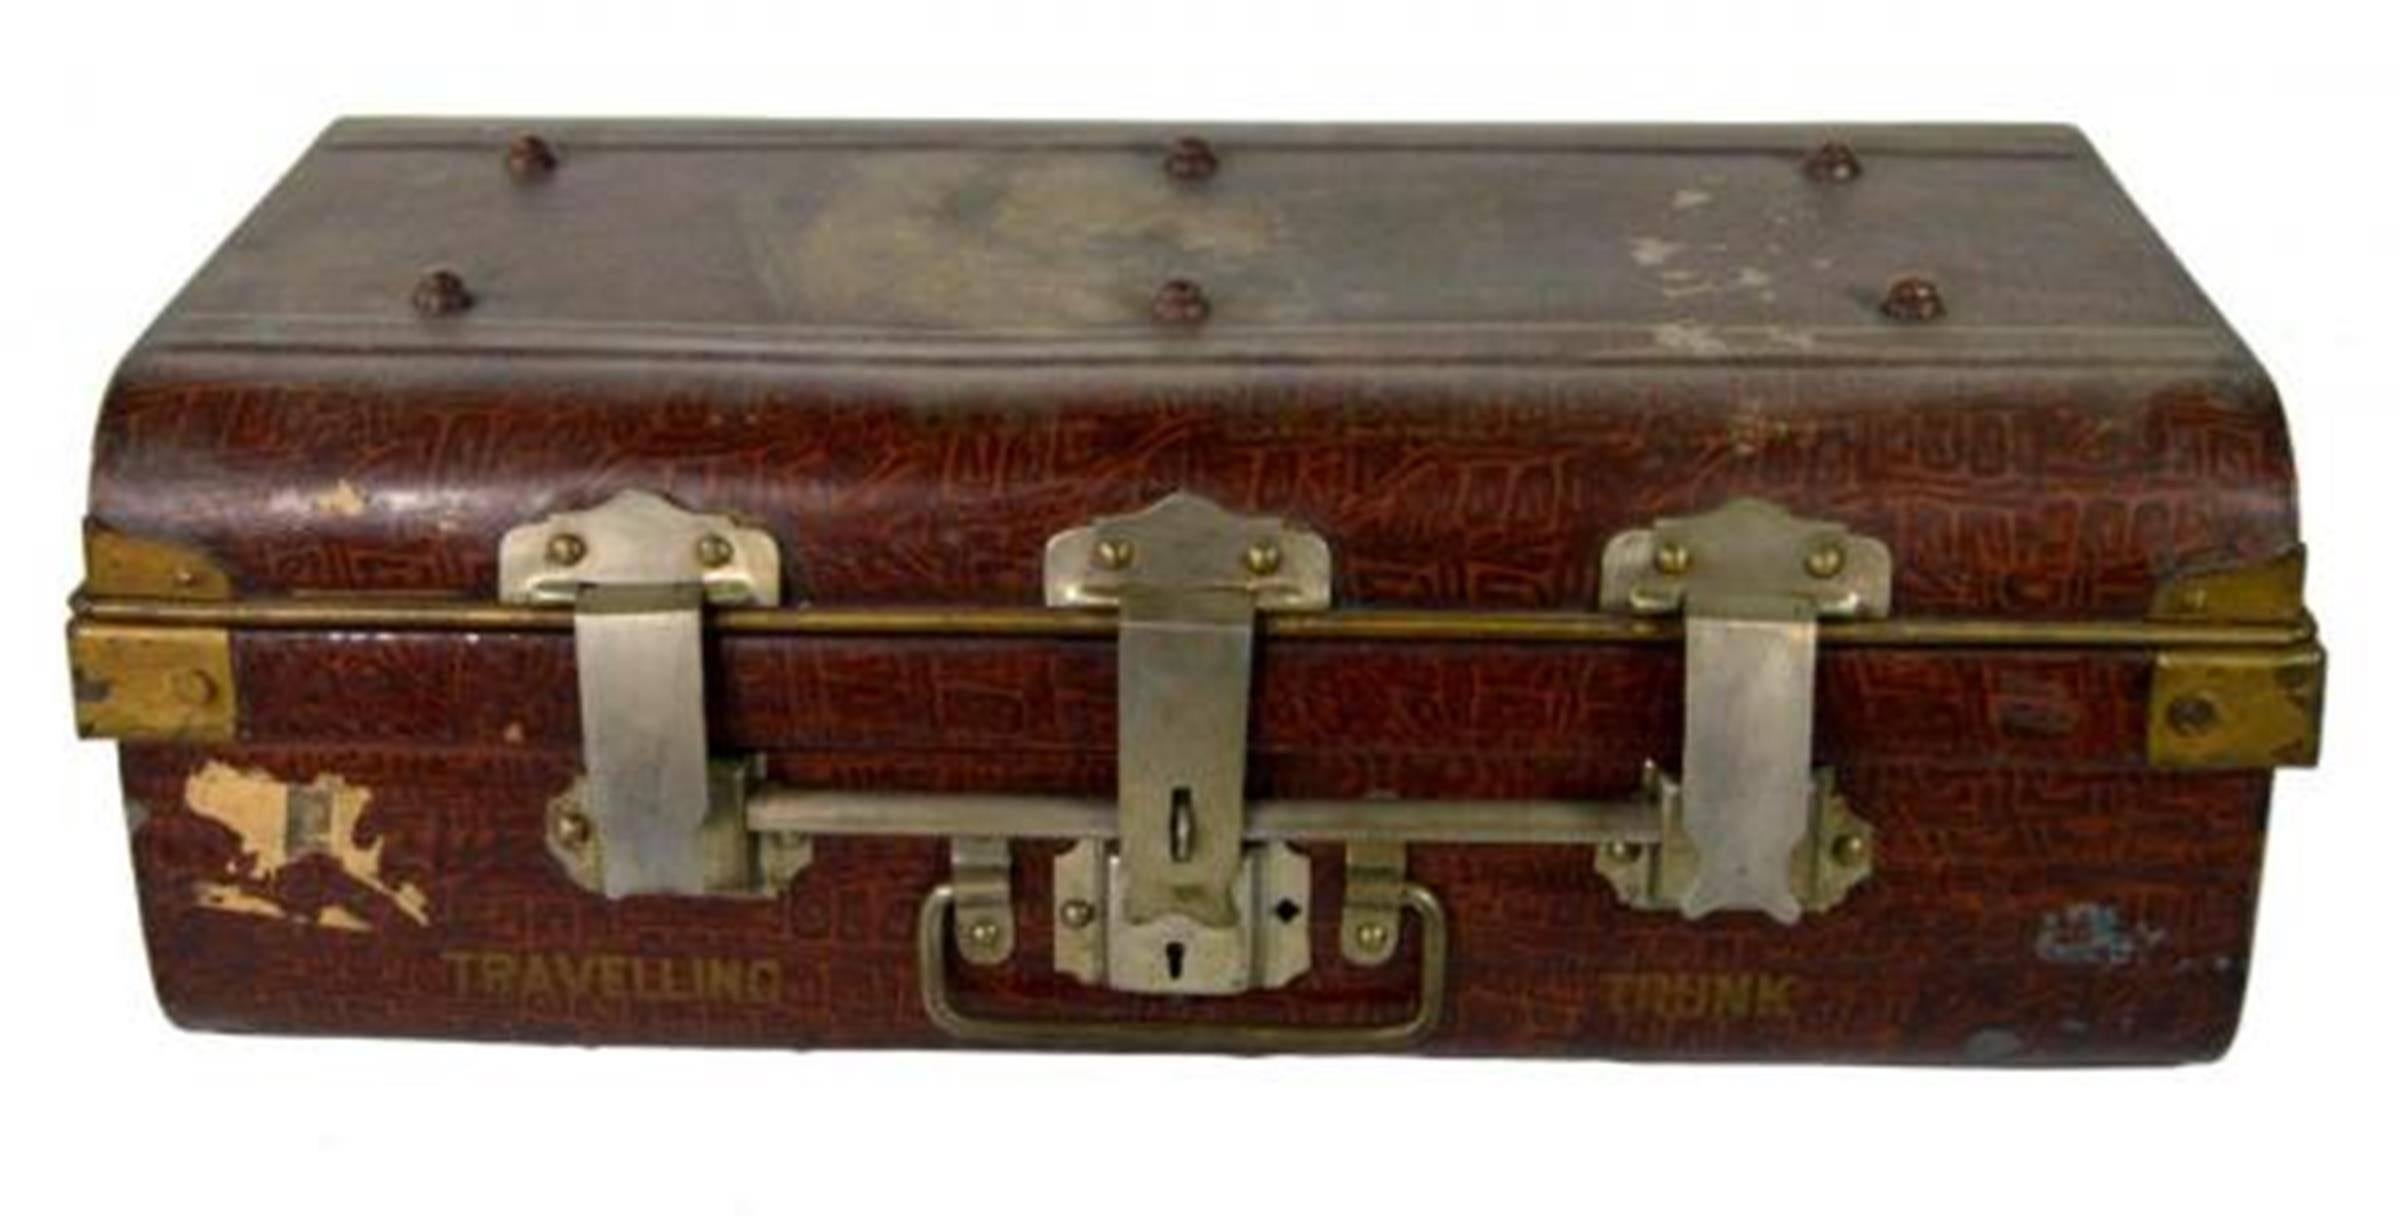 Antique British Wilkes & Son Locked Metal Trunk for Export, circa 1800 In Good Condition For Sale In Yonkers, NY